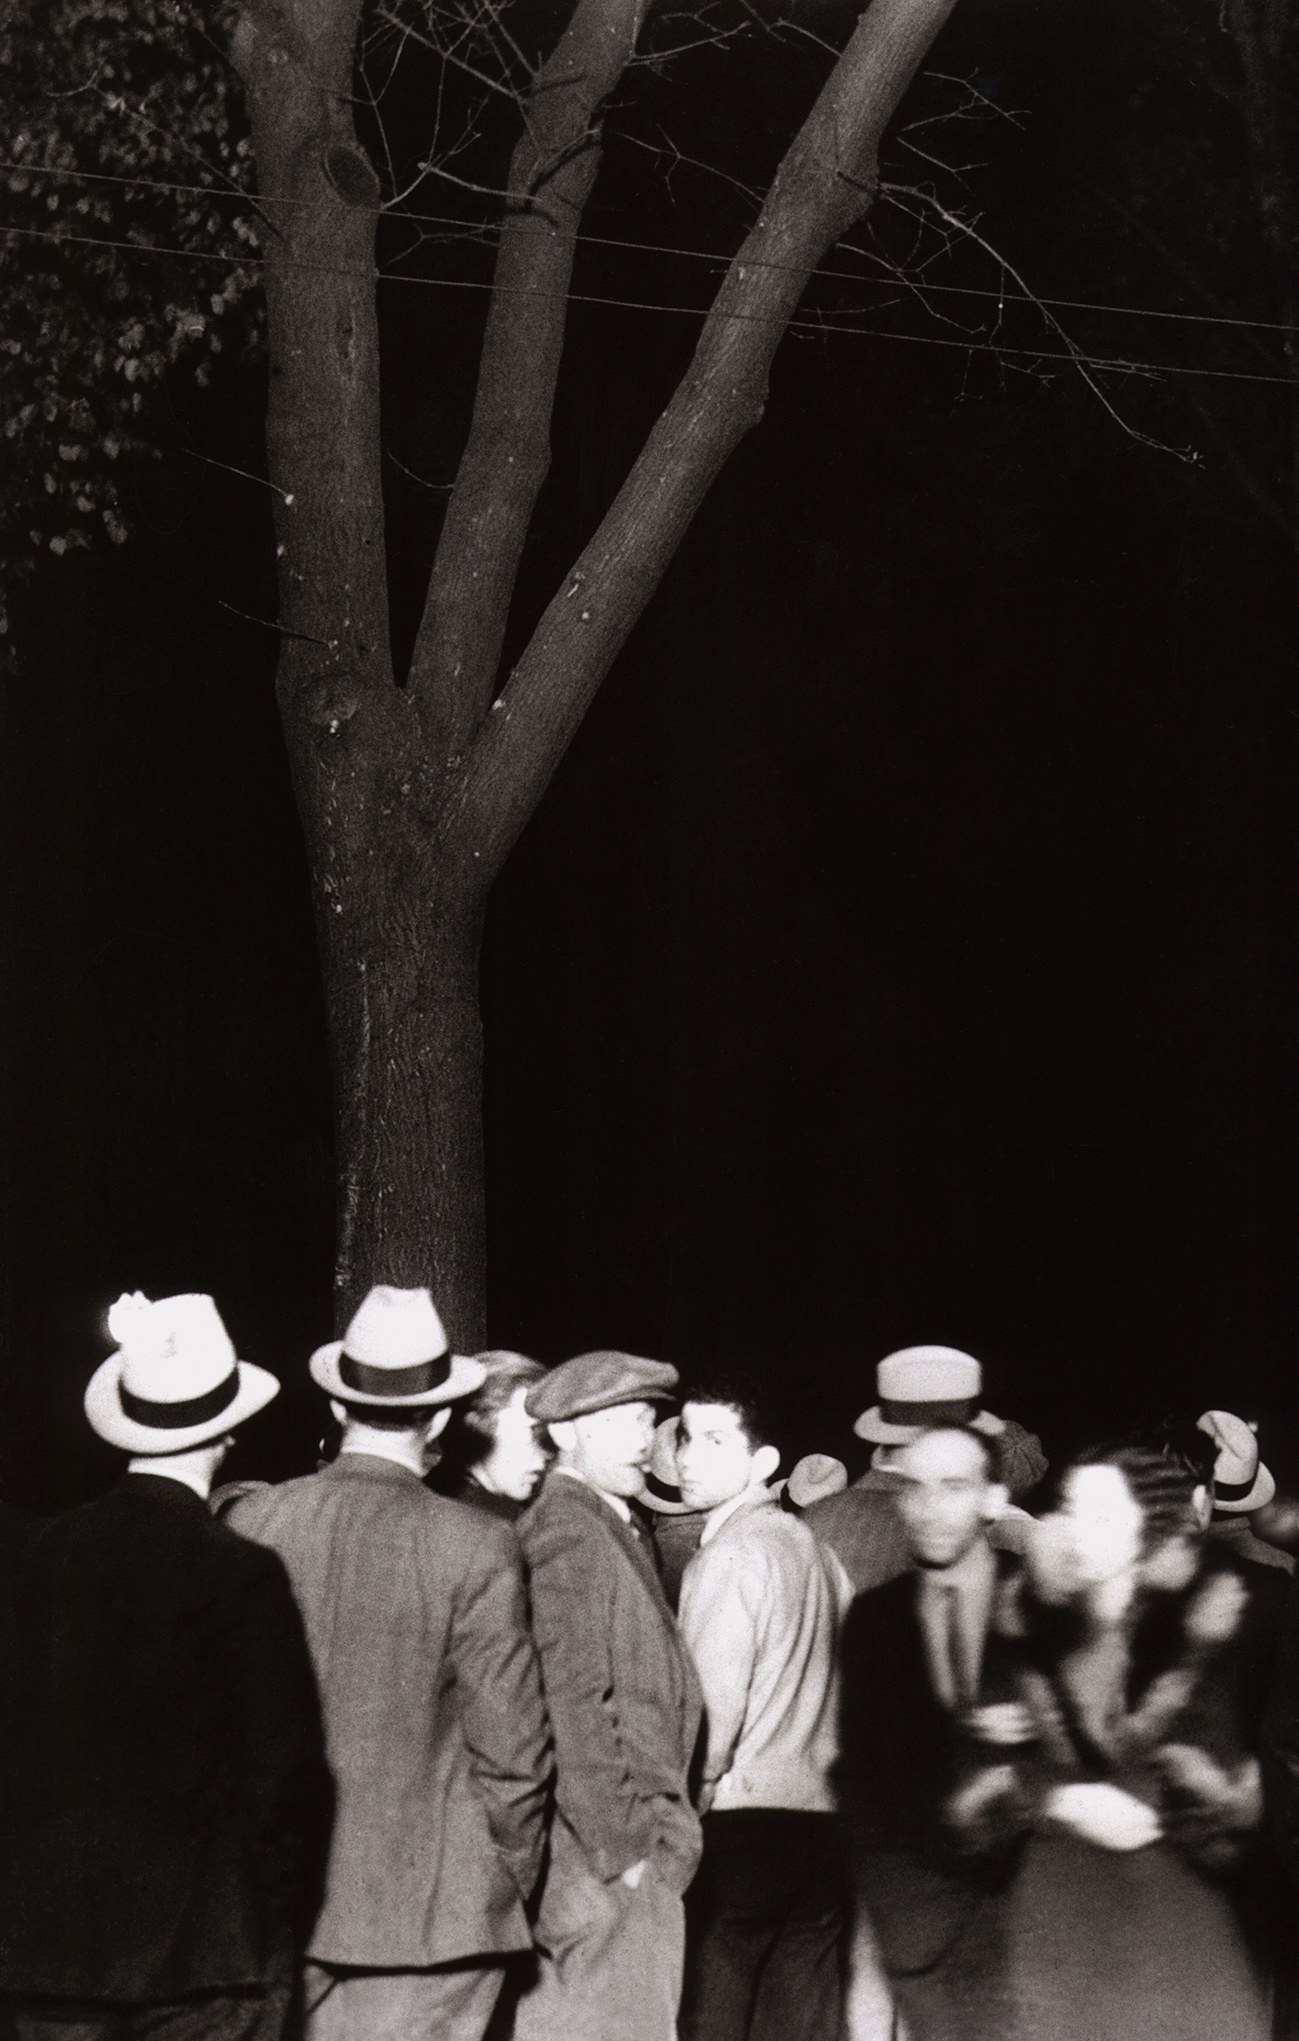 Black-and-white nighttime photograph of a group of white men in hats in front of a tree